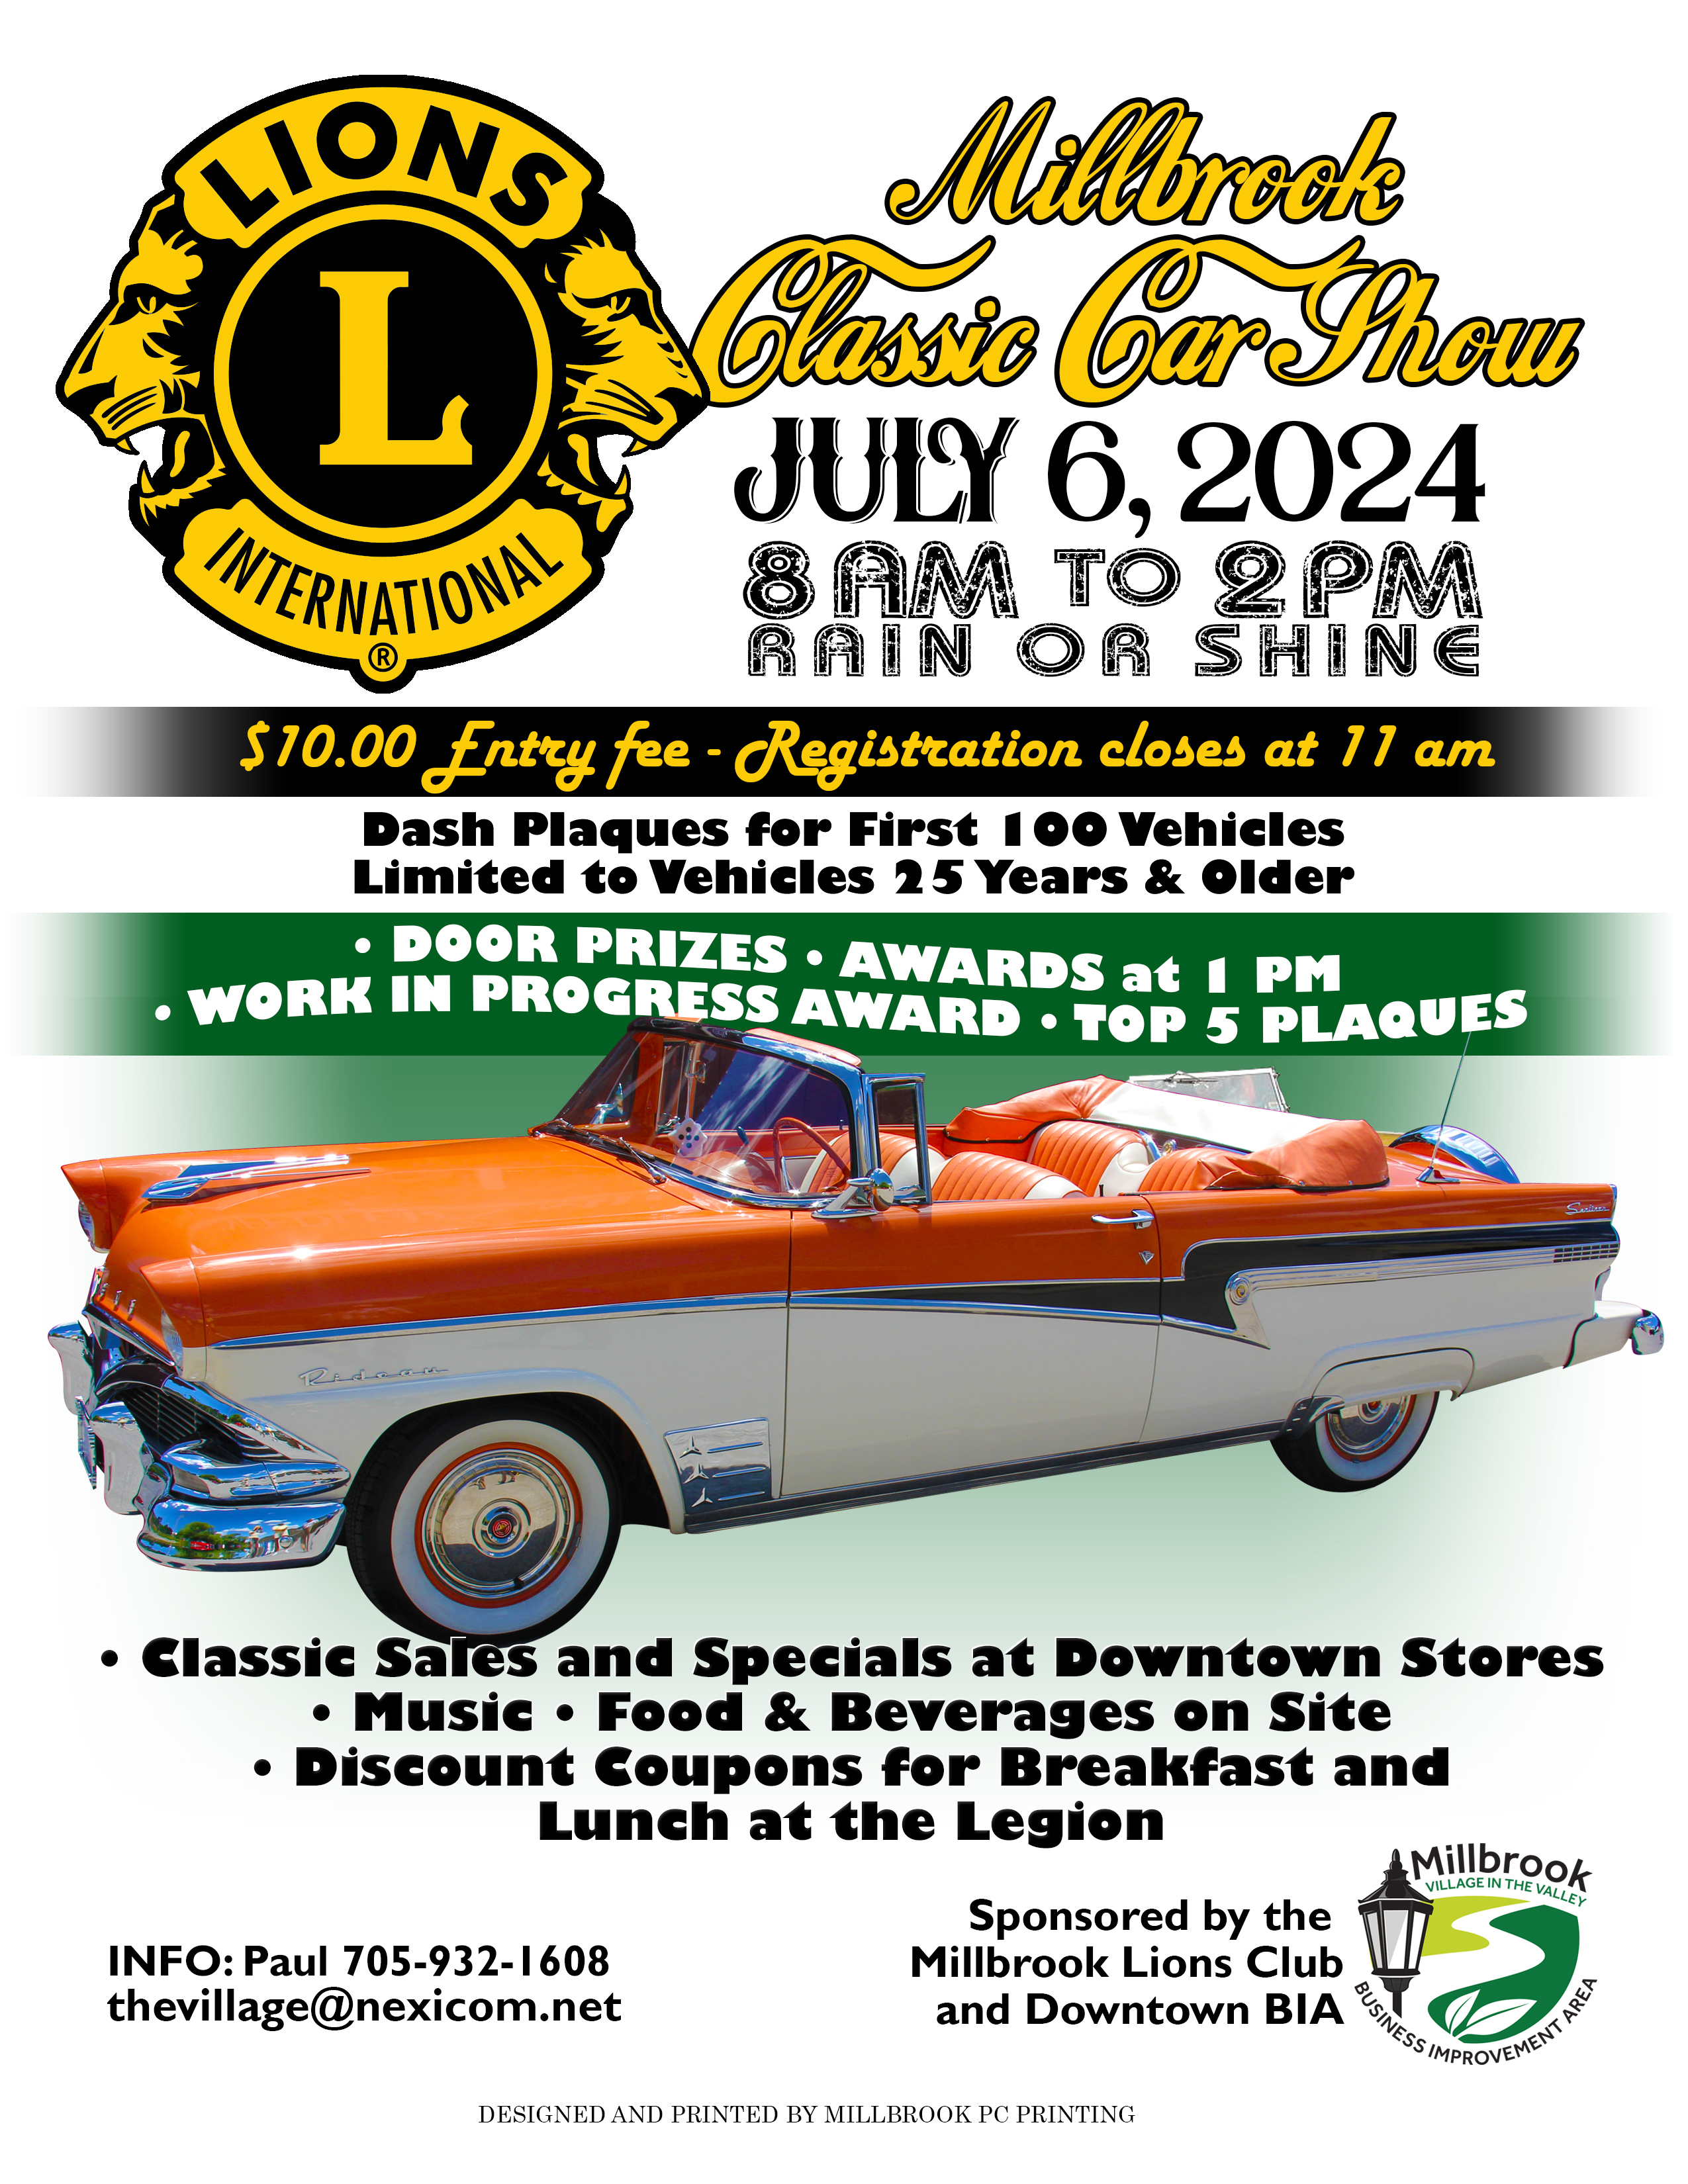 Car Show Poster; $10 entry fee; dash plaques for first 100 vehicles; more info contact Paul 705-932-1608